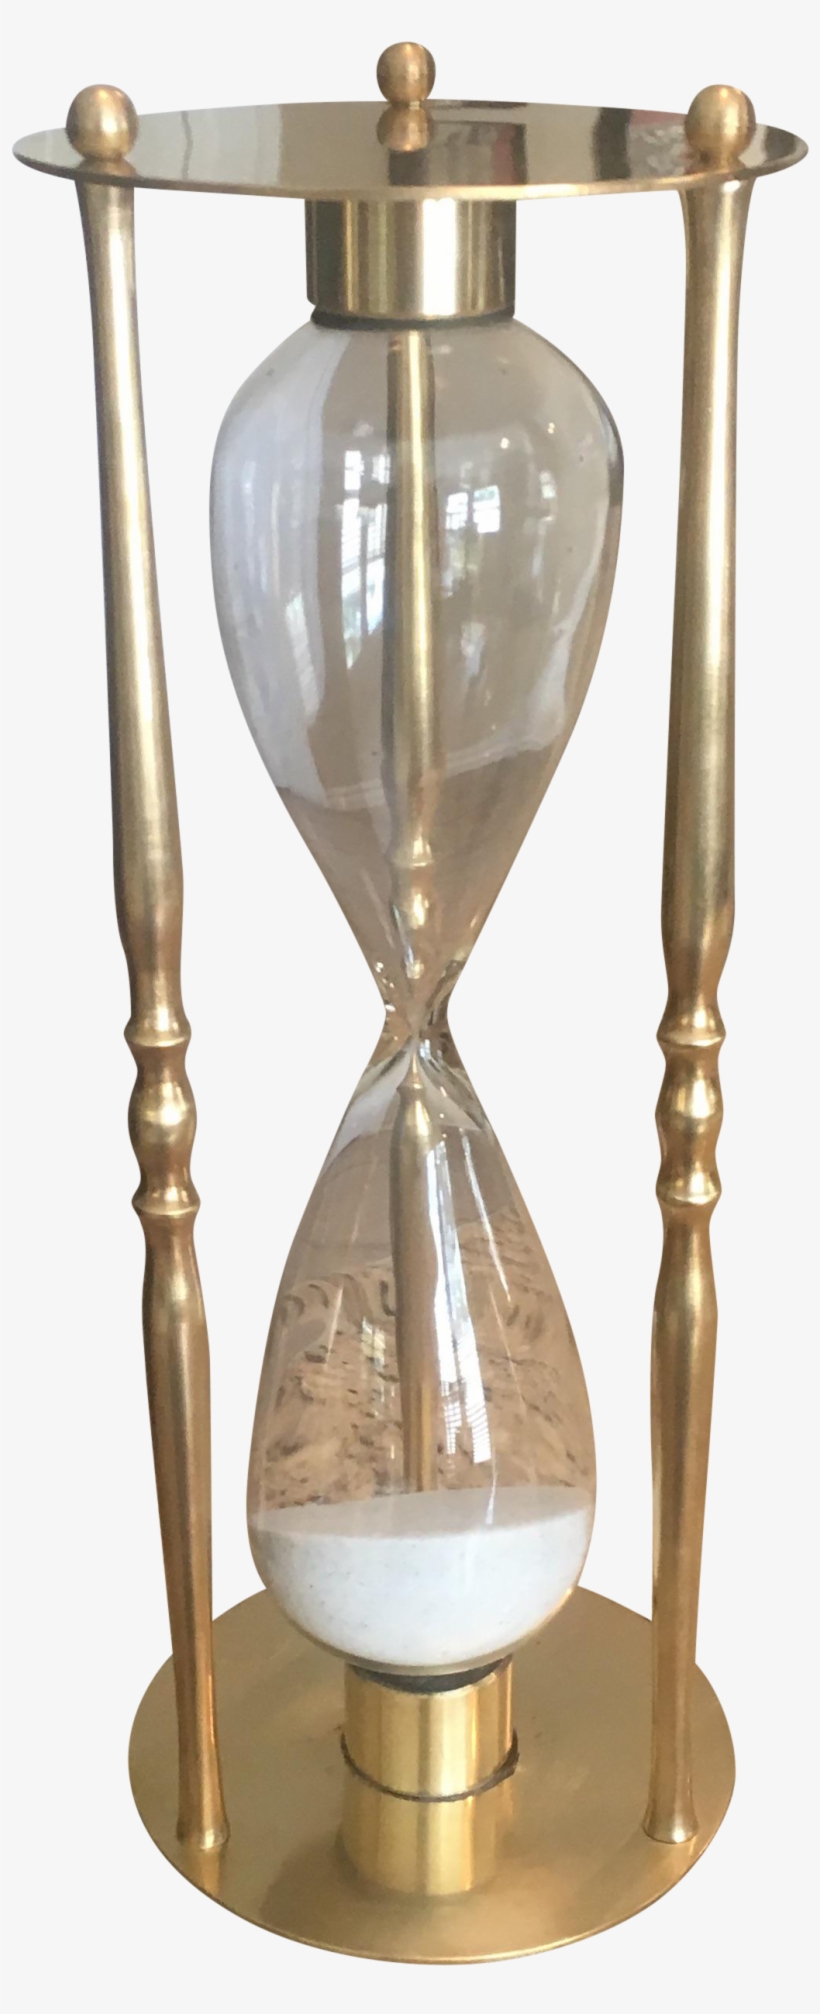 Black Sand Hourglass Vintage Mid Century Brass Hourglass - Hourglass, transparent png #137165